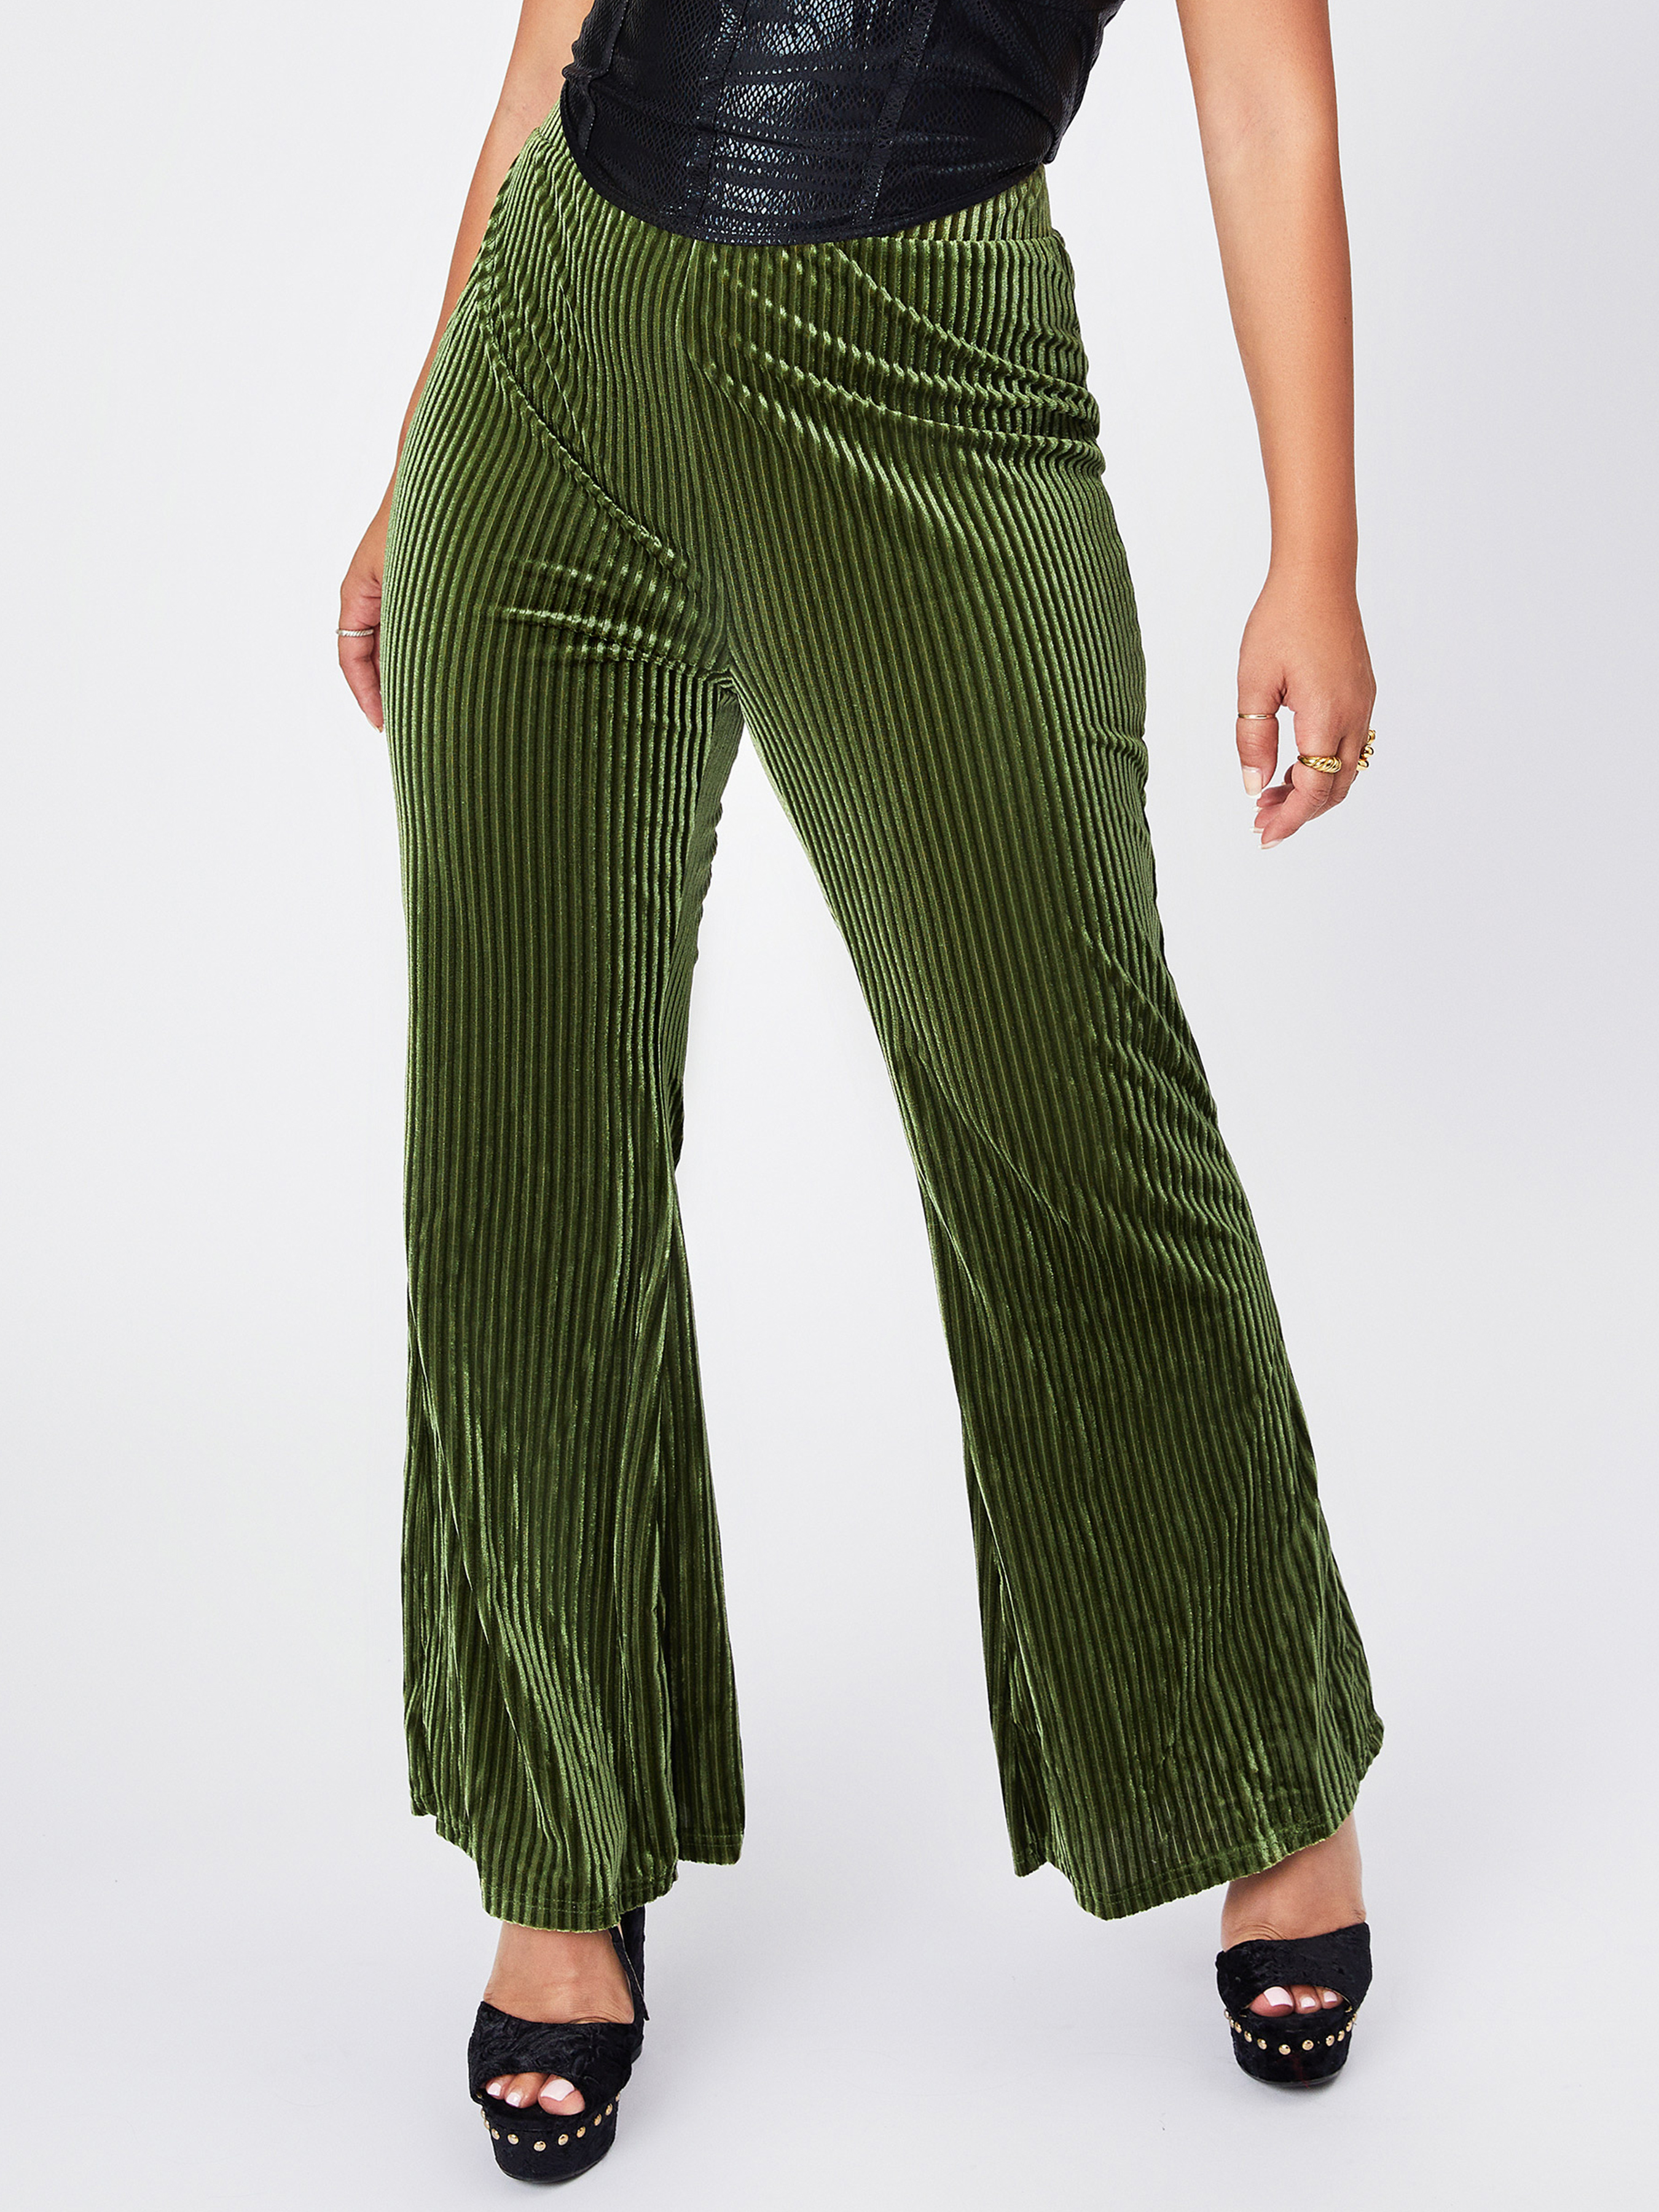 Amazon.com: Wide Leg Sweatpants Women, Women High Waisted Velvet Flare  Pants Plus Size Solid Color Business Casual Slim Fit Vintage Long Pants  Trousers 01-Army Green : Sports & Outdoors